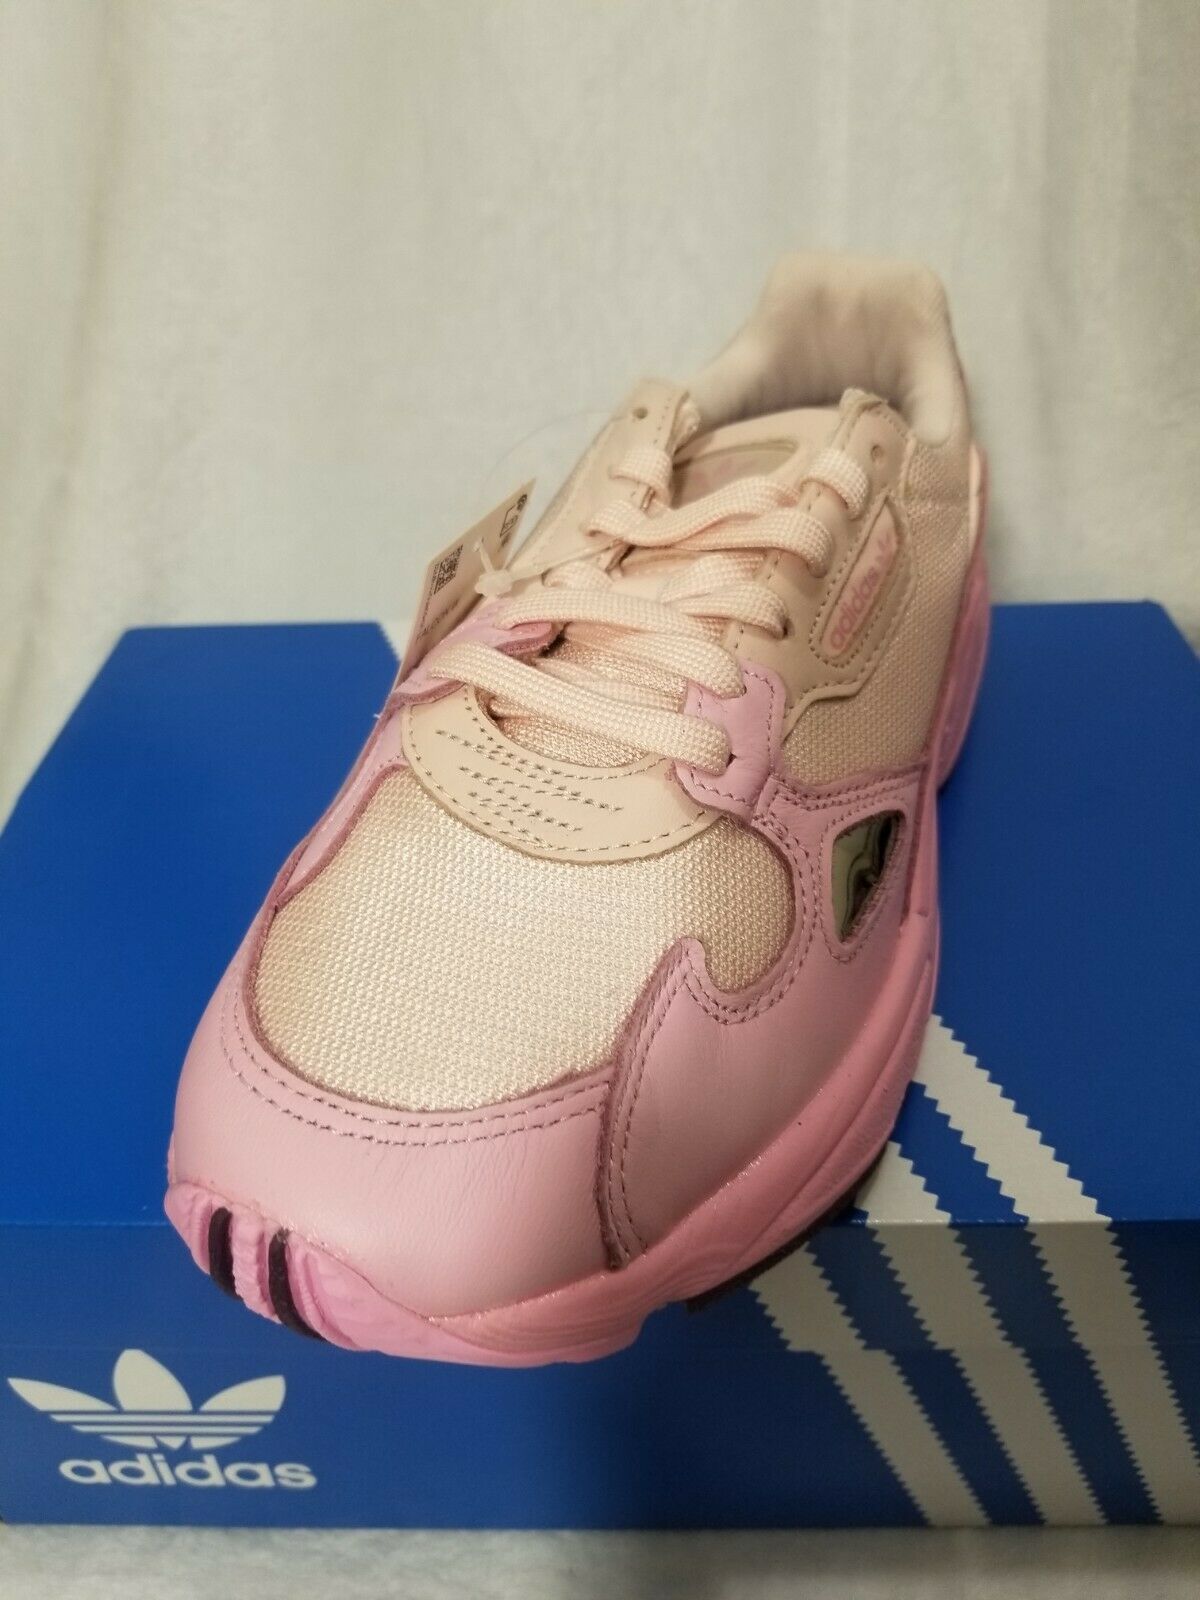 adidas originals falcon shoes women's Size 7.5 Pink nwt